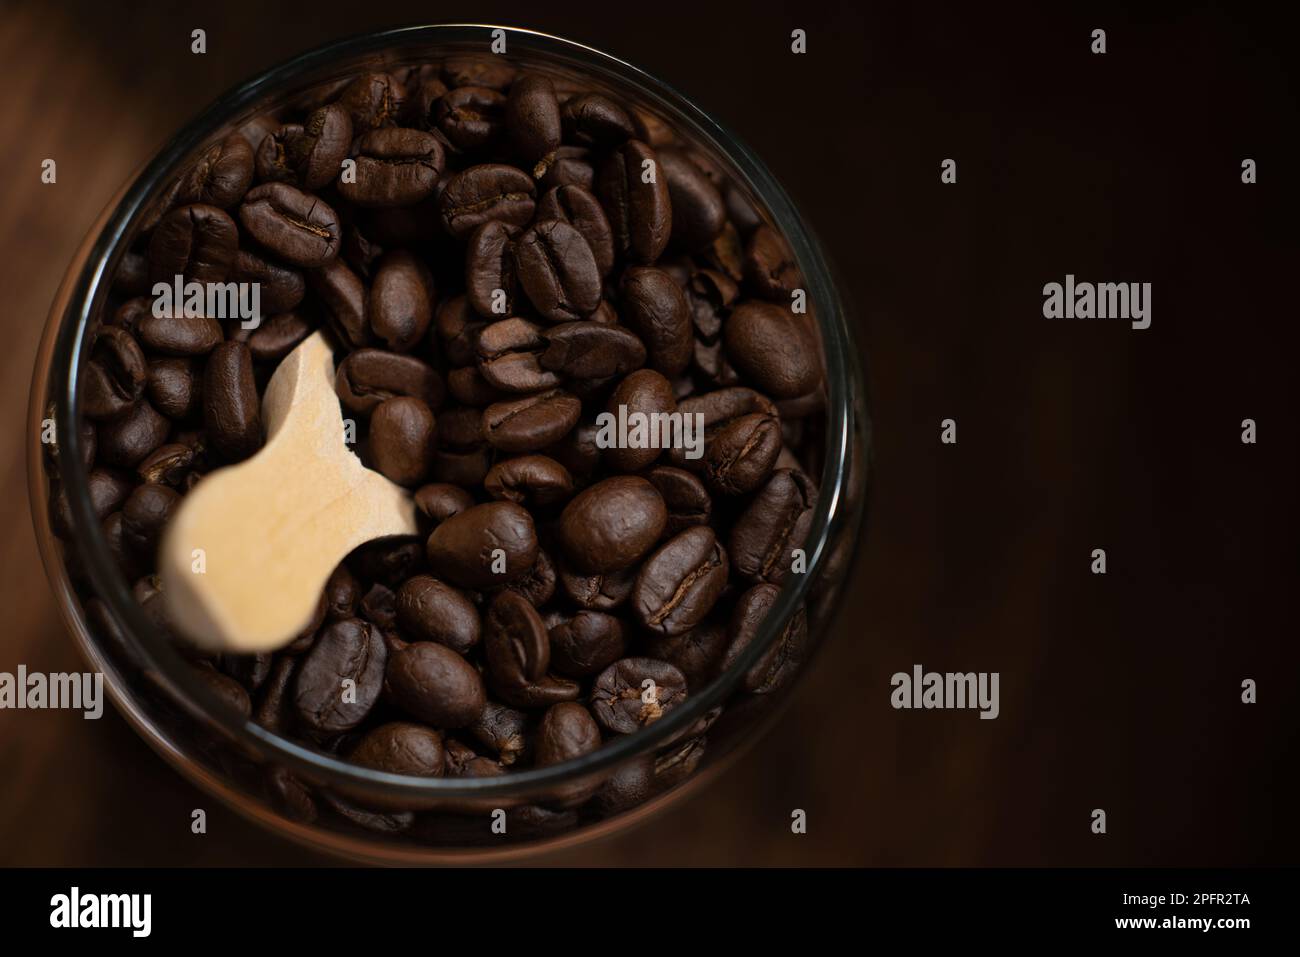 Coffee Beans display in dark background in dark wooden base with wooden spoon in glass mason jar Stock Photo